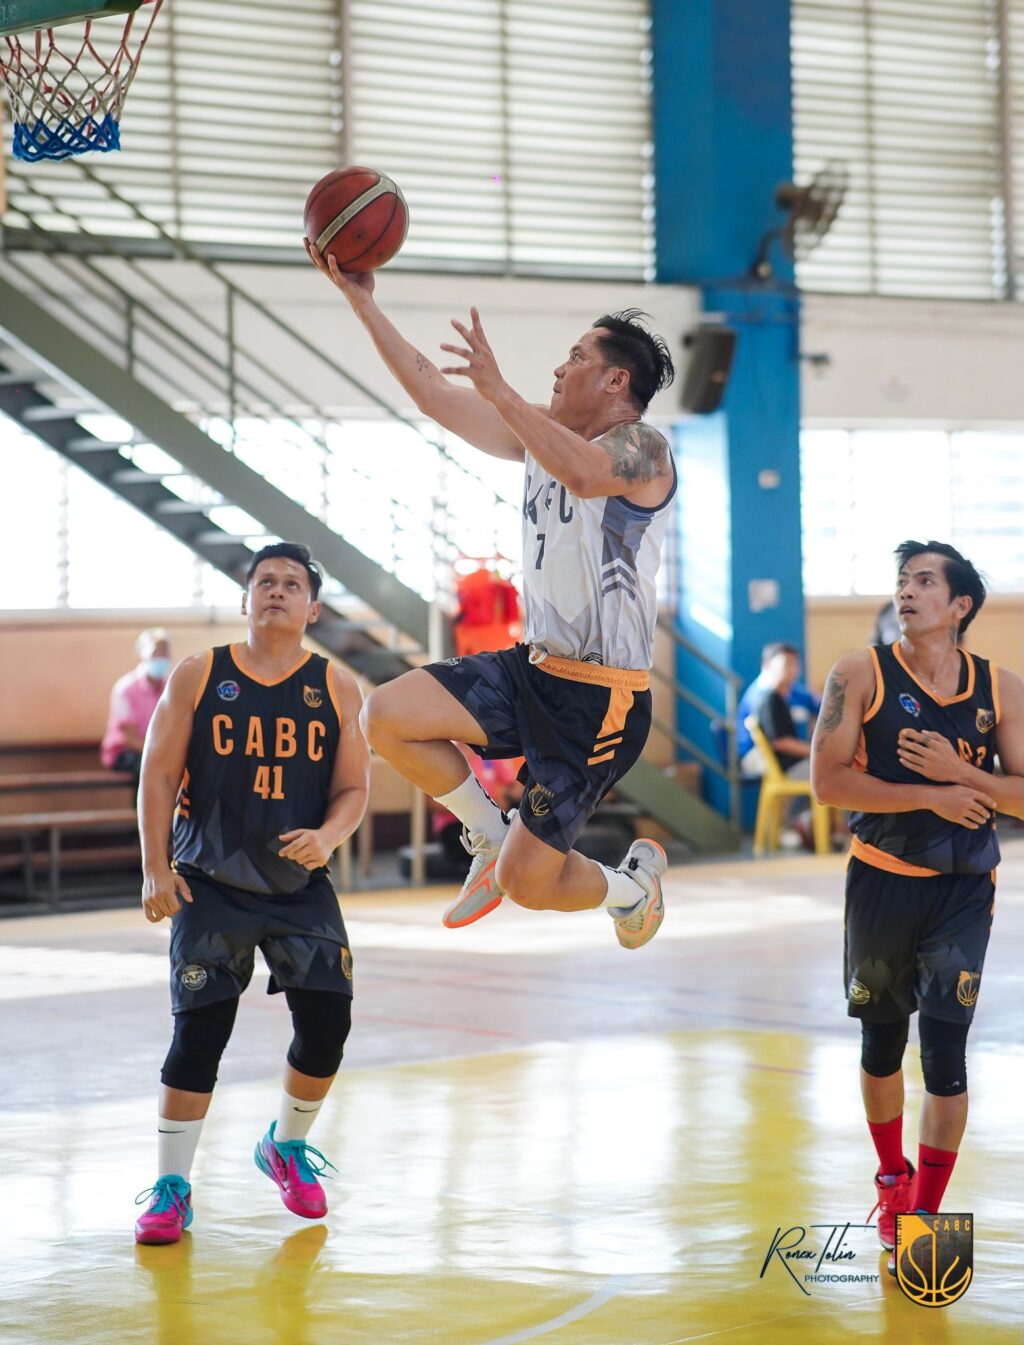 Boysen Paints destroys Lightstrong AAC in CABC 6th Corporate Cup. Miggy Aparri soars high for a layup during their CABC 6th Corporate Cup Game. | Contributed photo